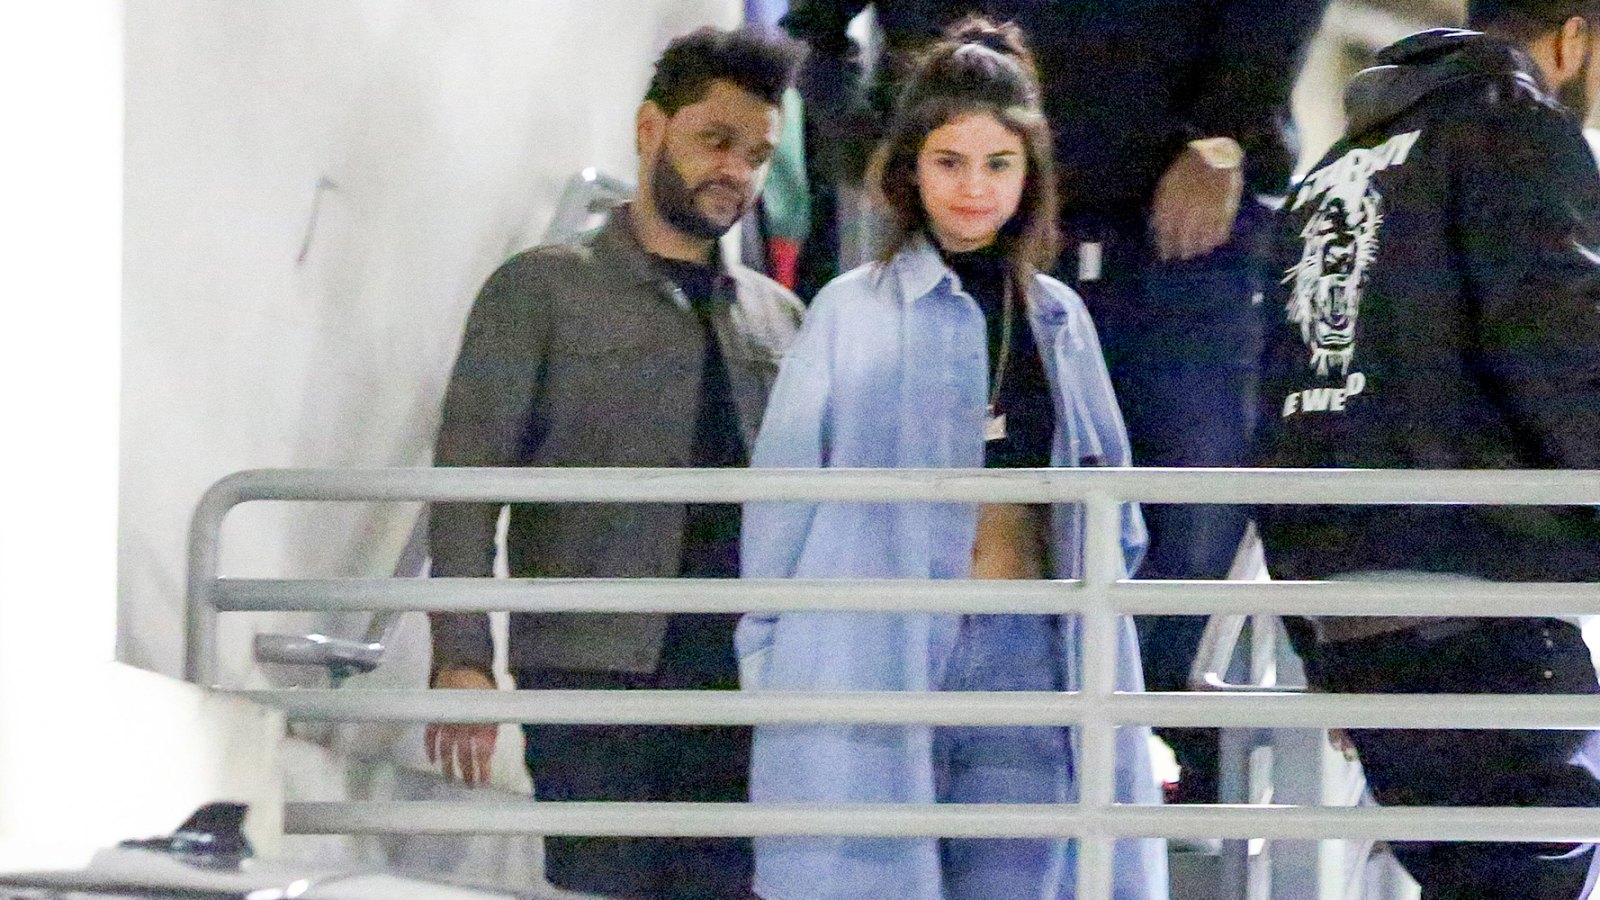 Selena Gomez and The Weeknd enjoy a 4-hour date night at Dave & Buster's in Hollywood.